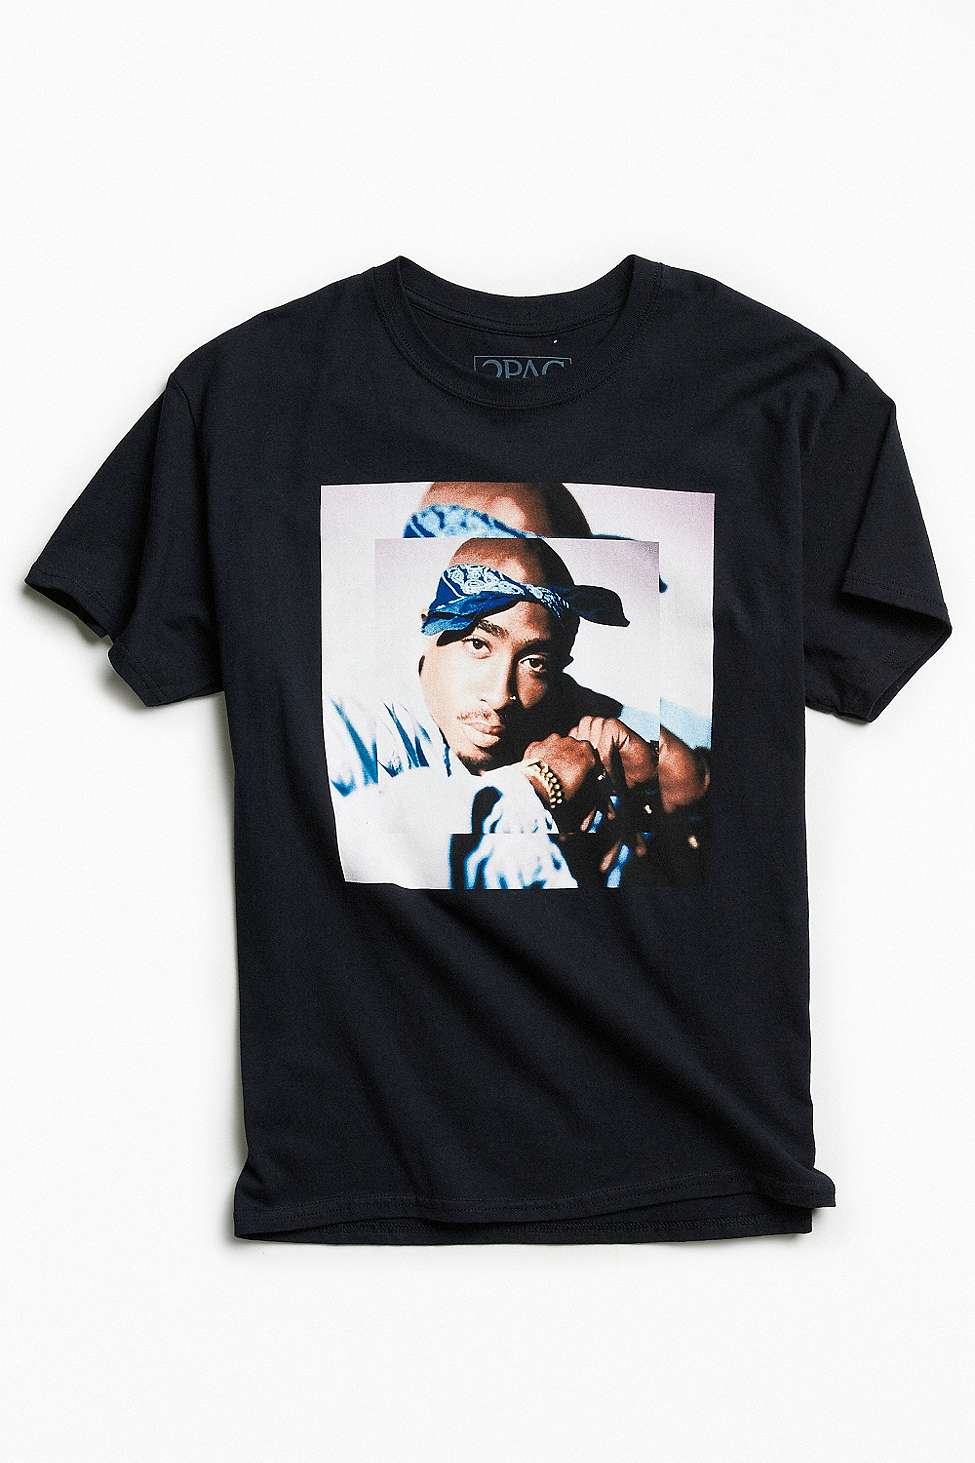 Urban Outfitters Pay Tribute To 2Pac With New Collection